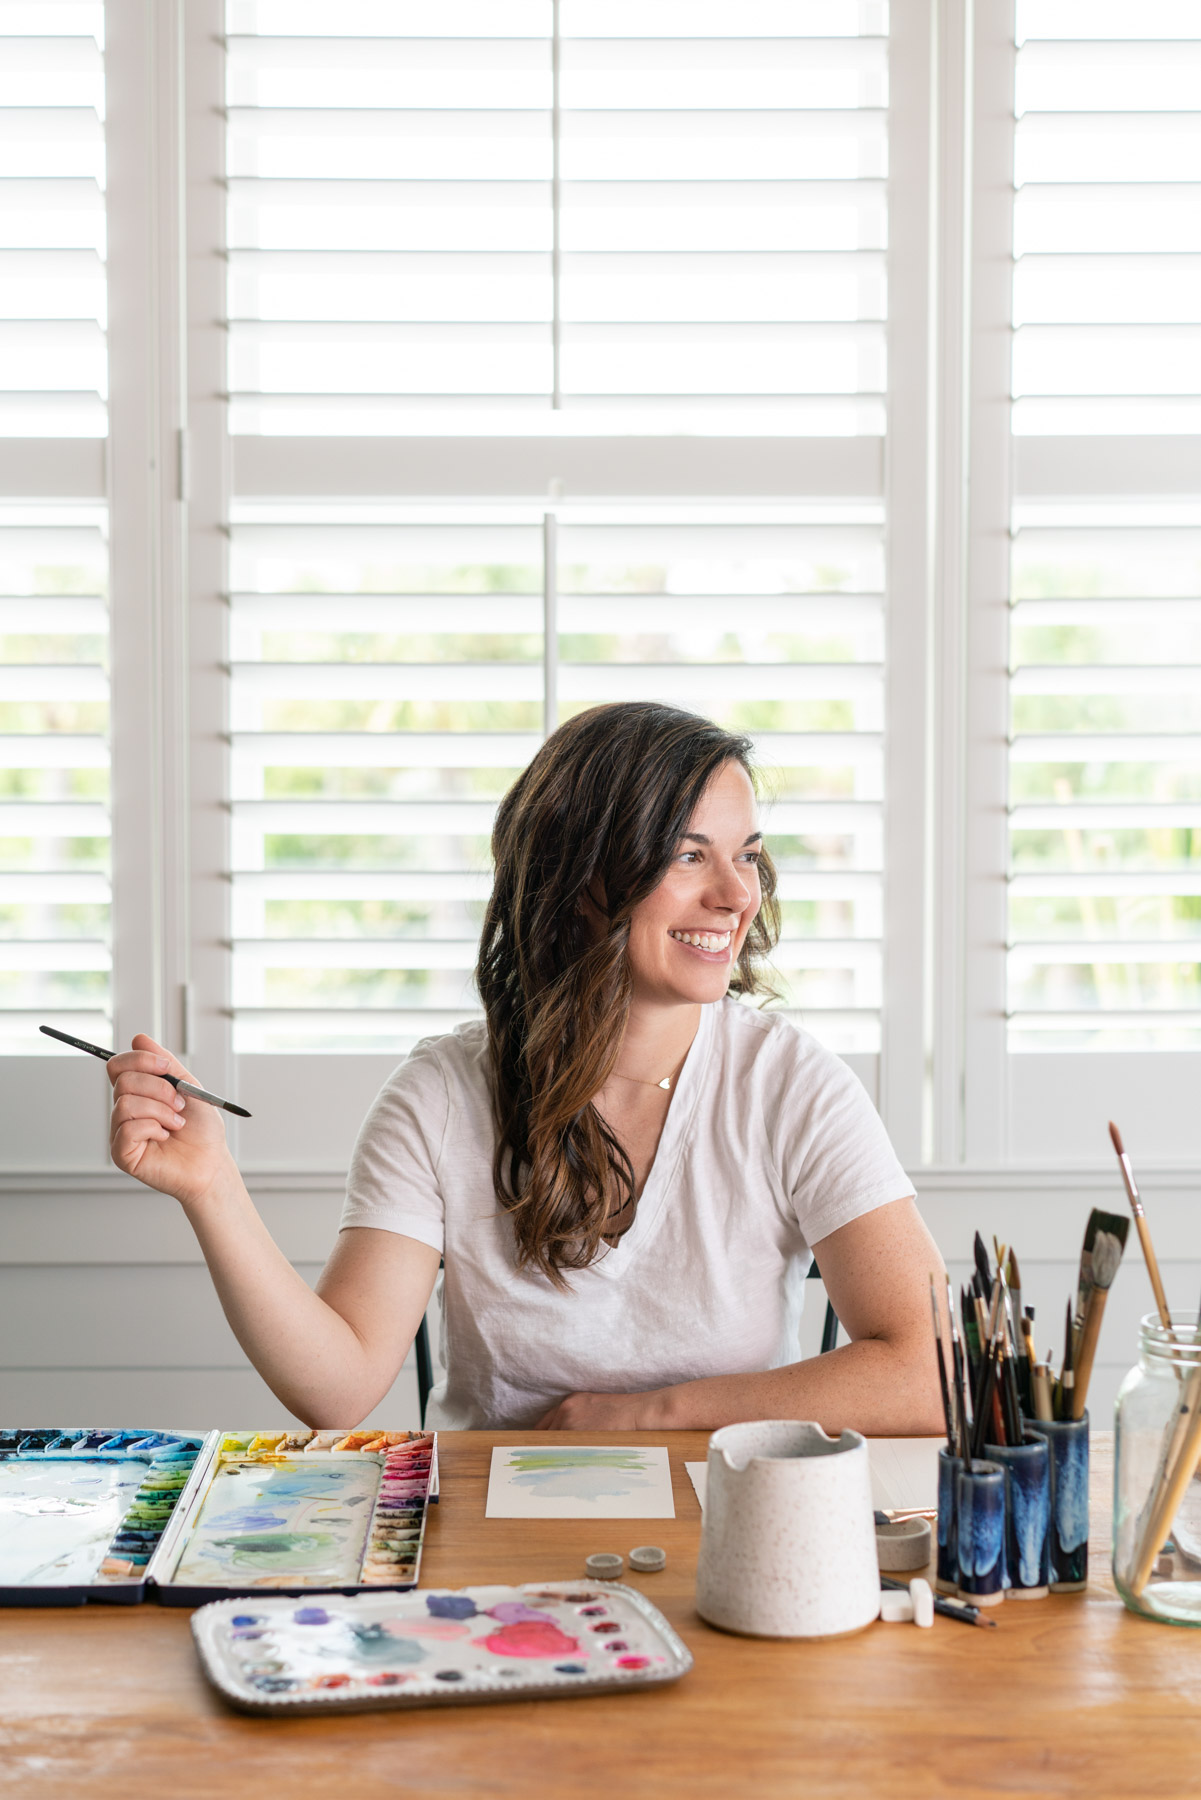 Brand photo of a female artist sitting at a table smiling with watercolor painting supplies